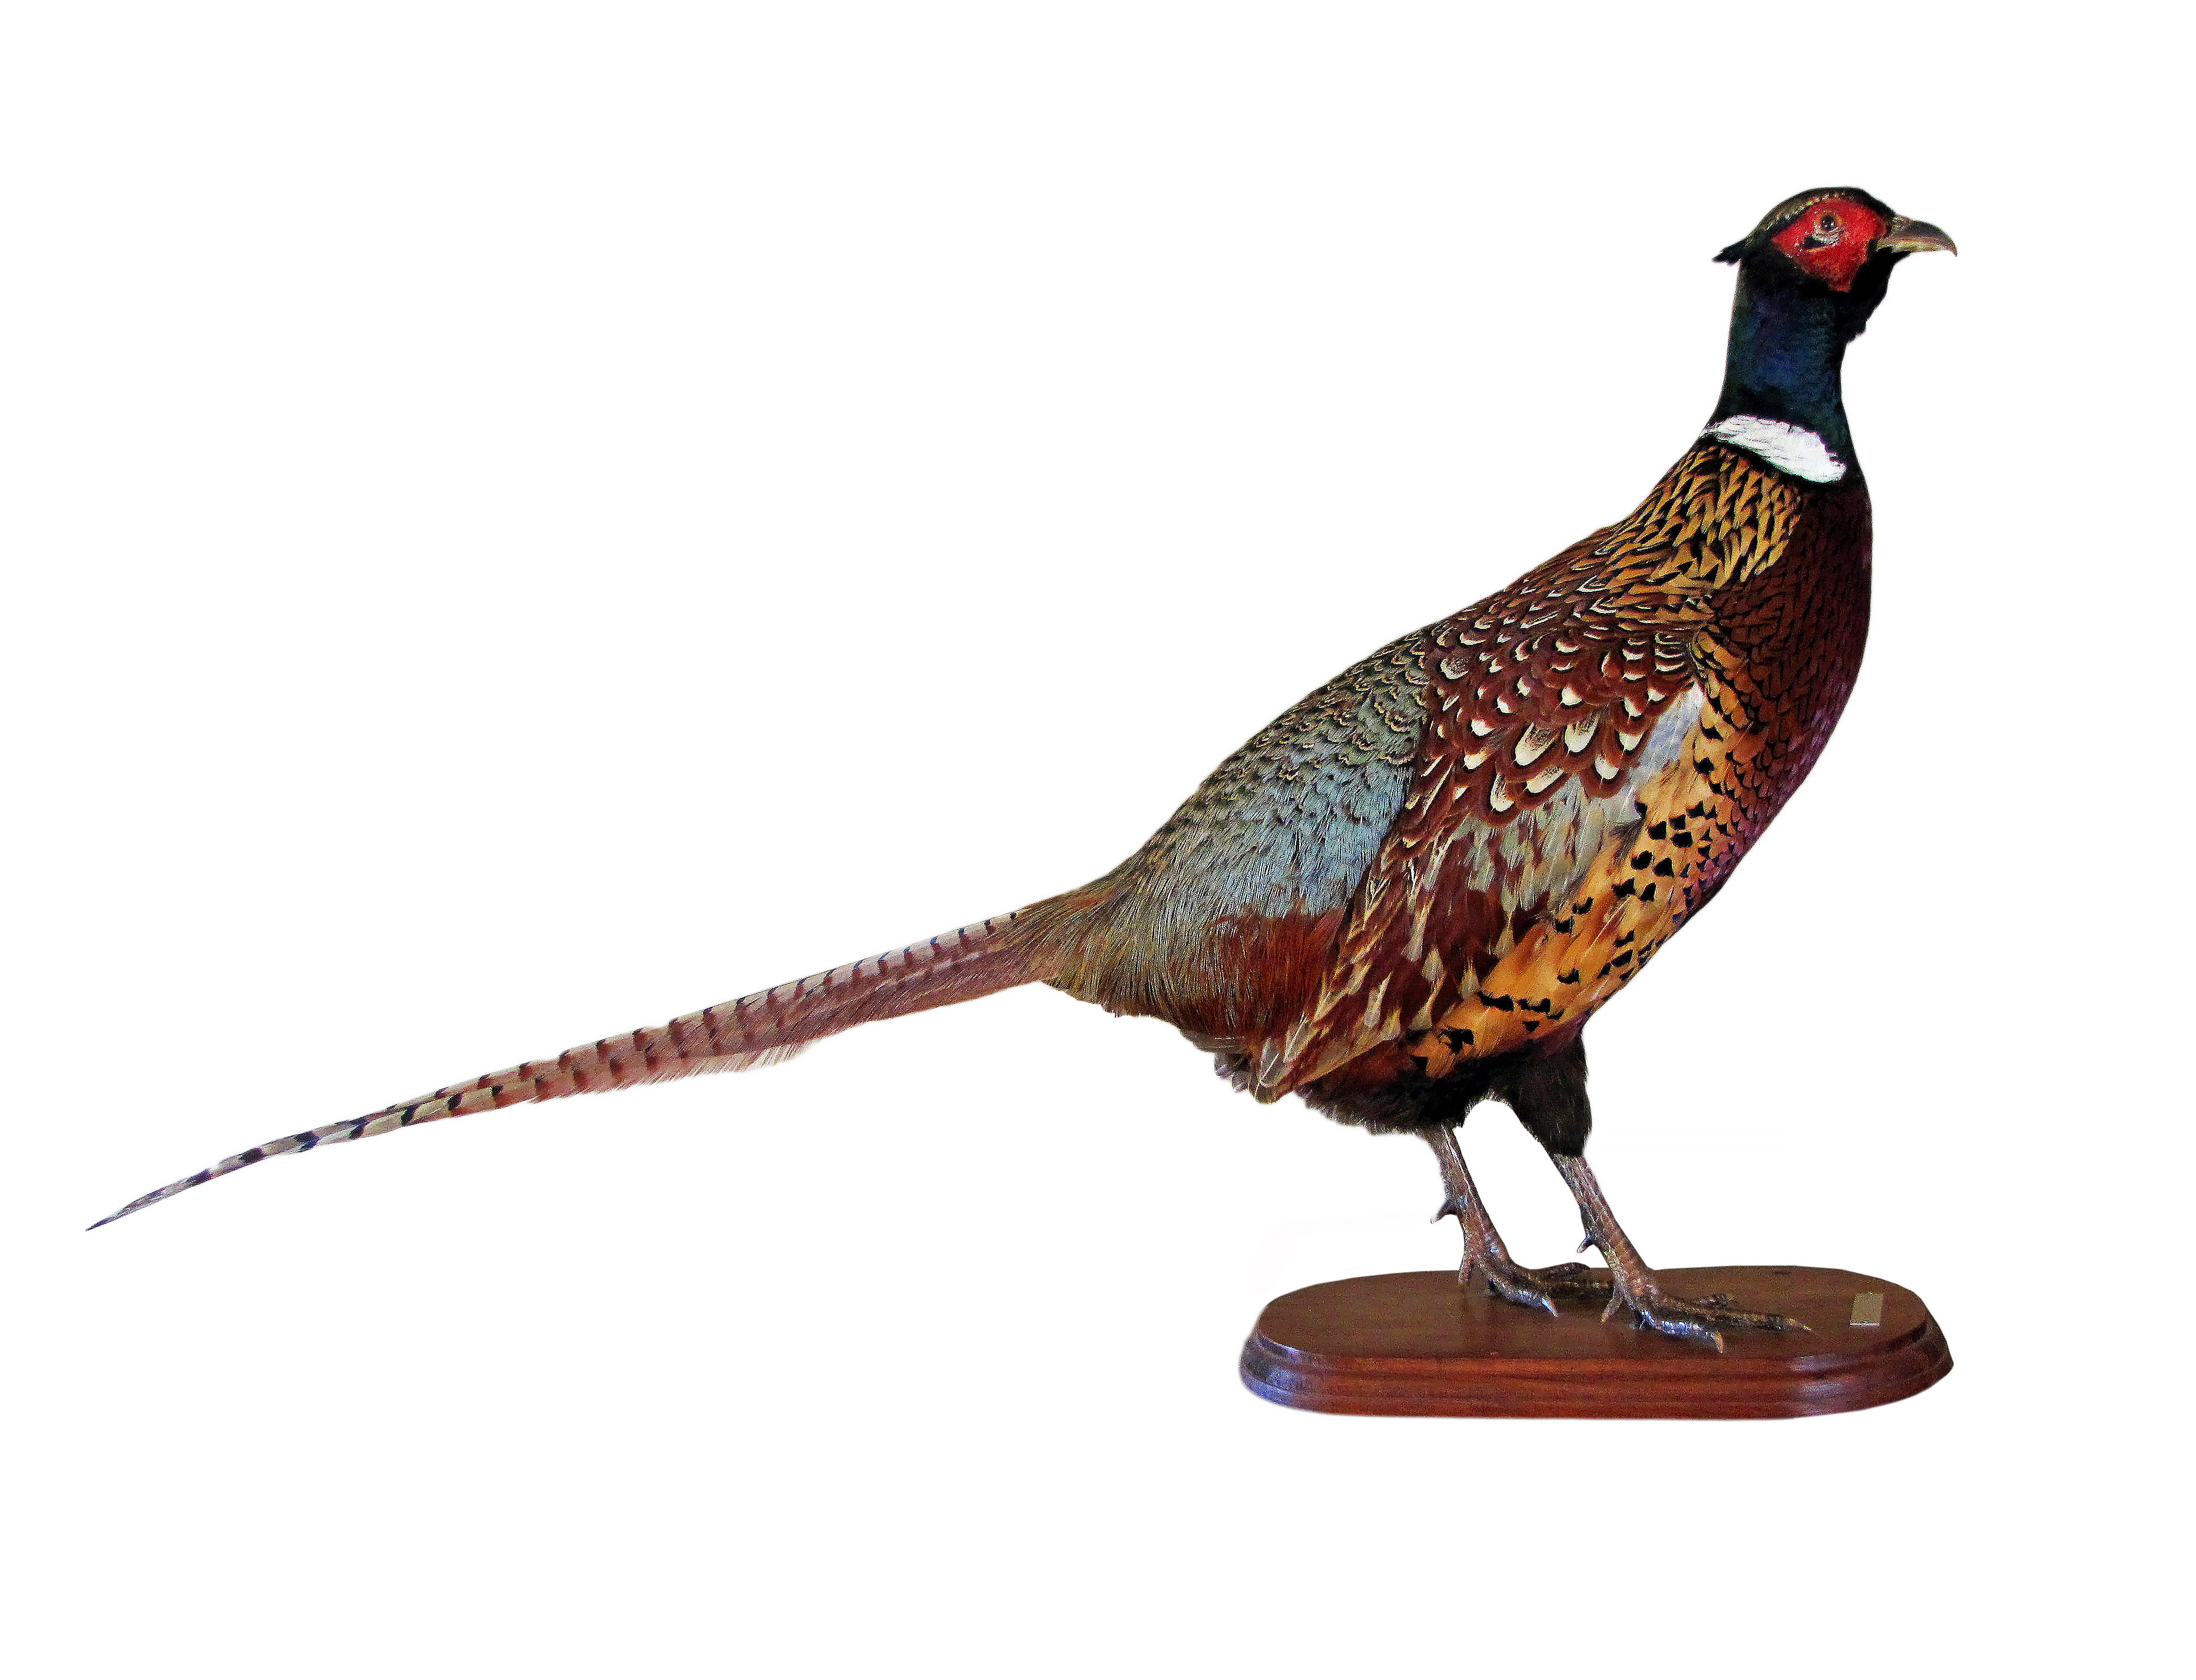 Dining Table or Taxidermist? by Colin Partridge